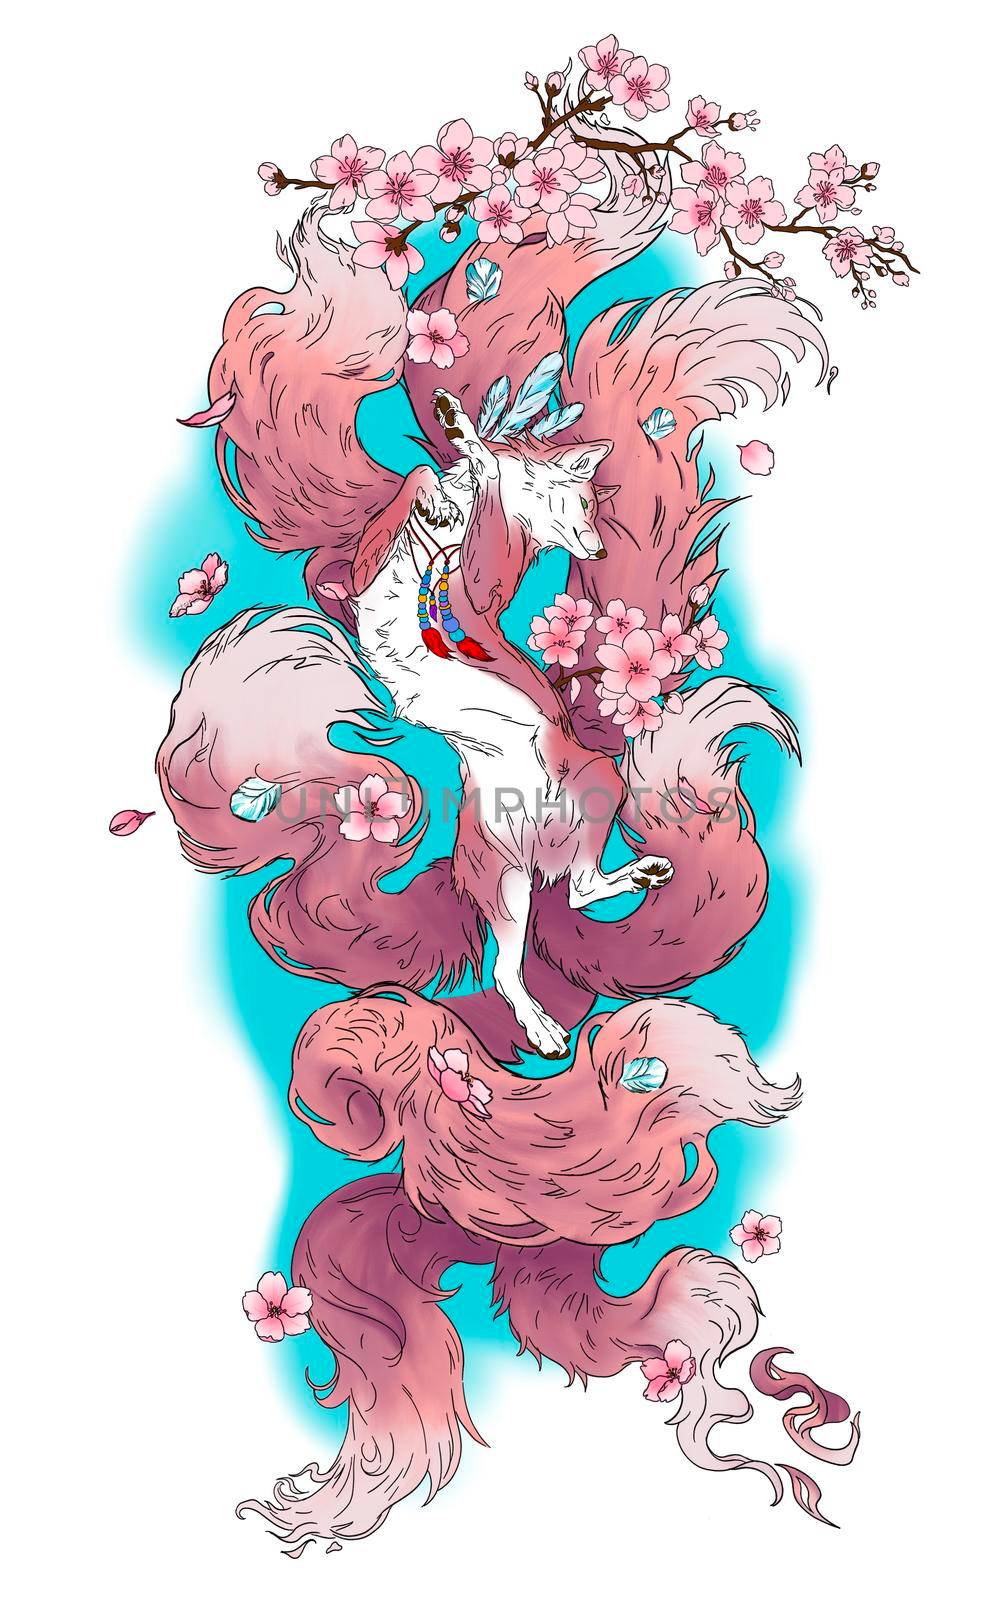 kitsune or kumiho with nine tails in delicate pastel shades